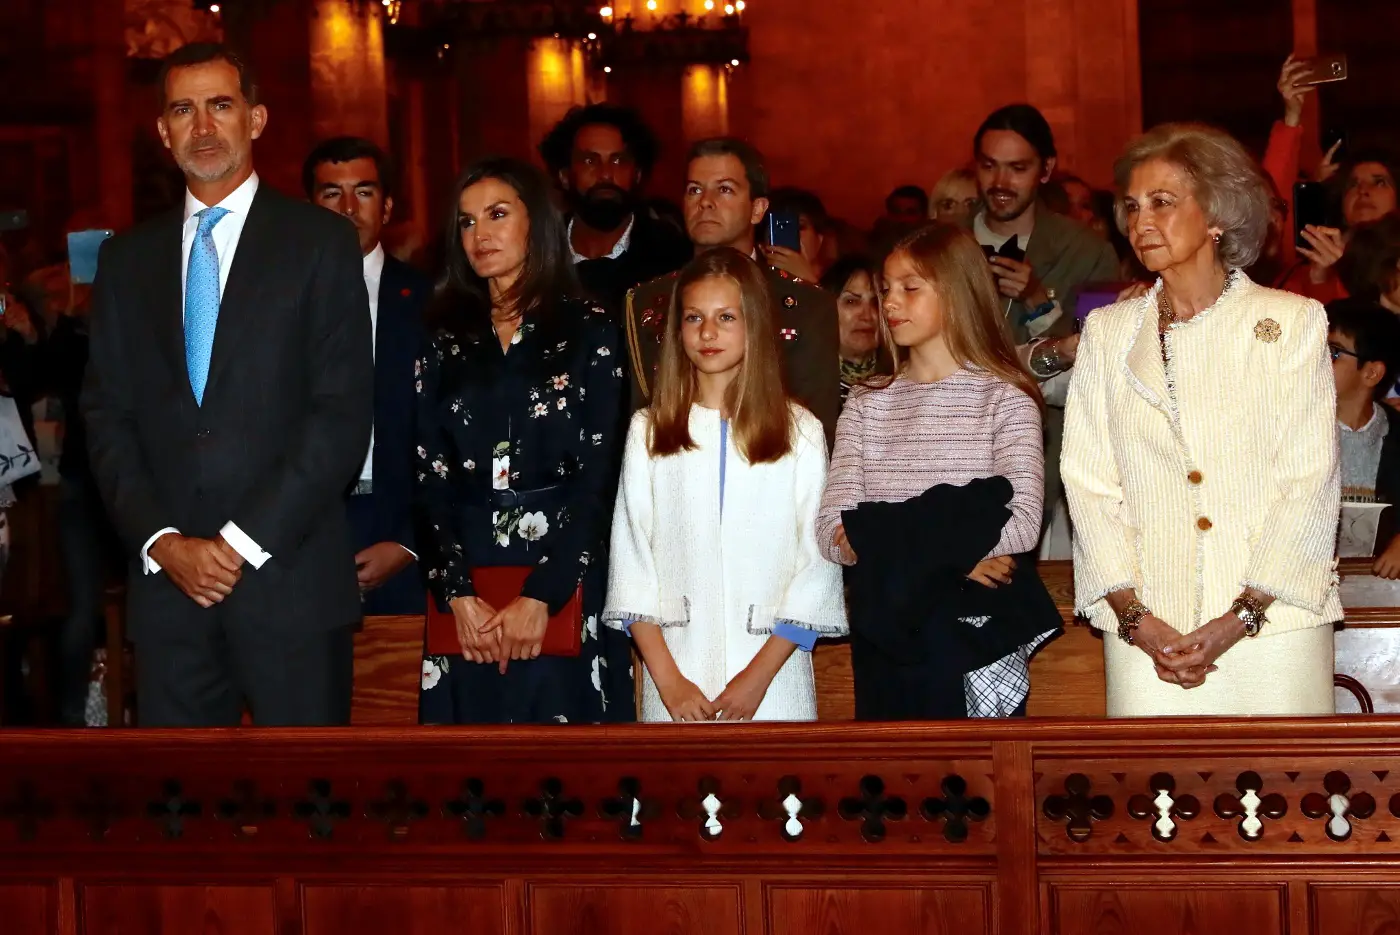 Spanish Royal Family at Easter Mass in 2019